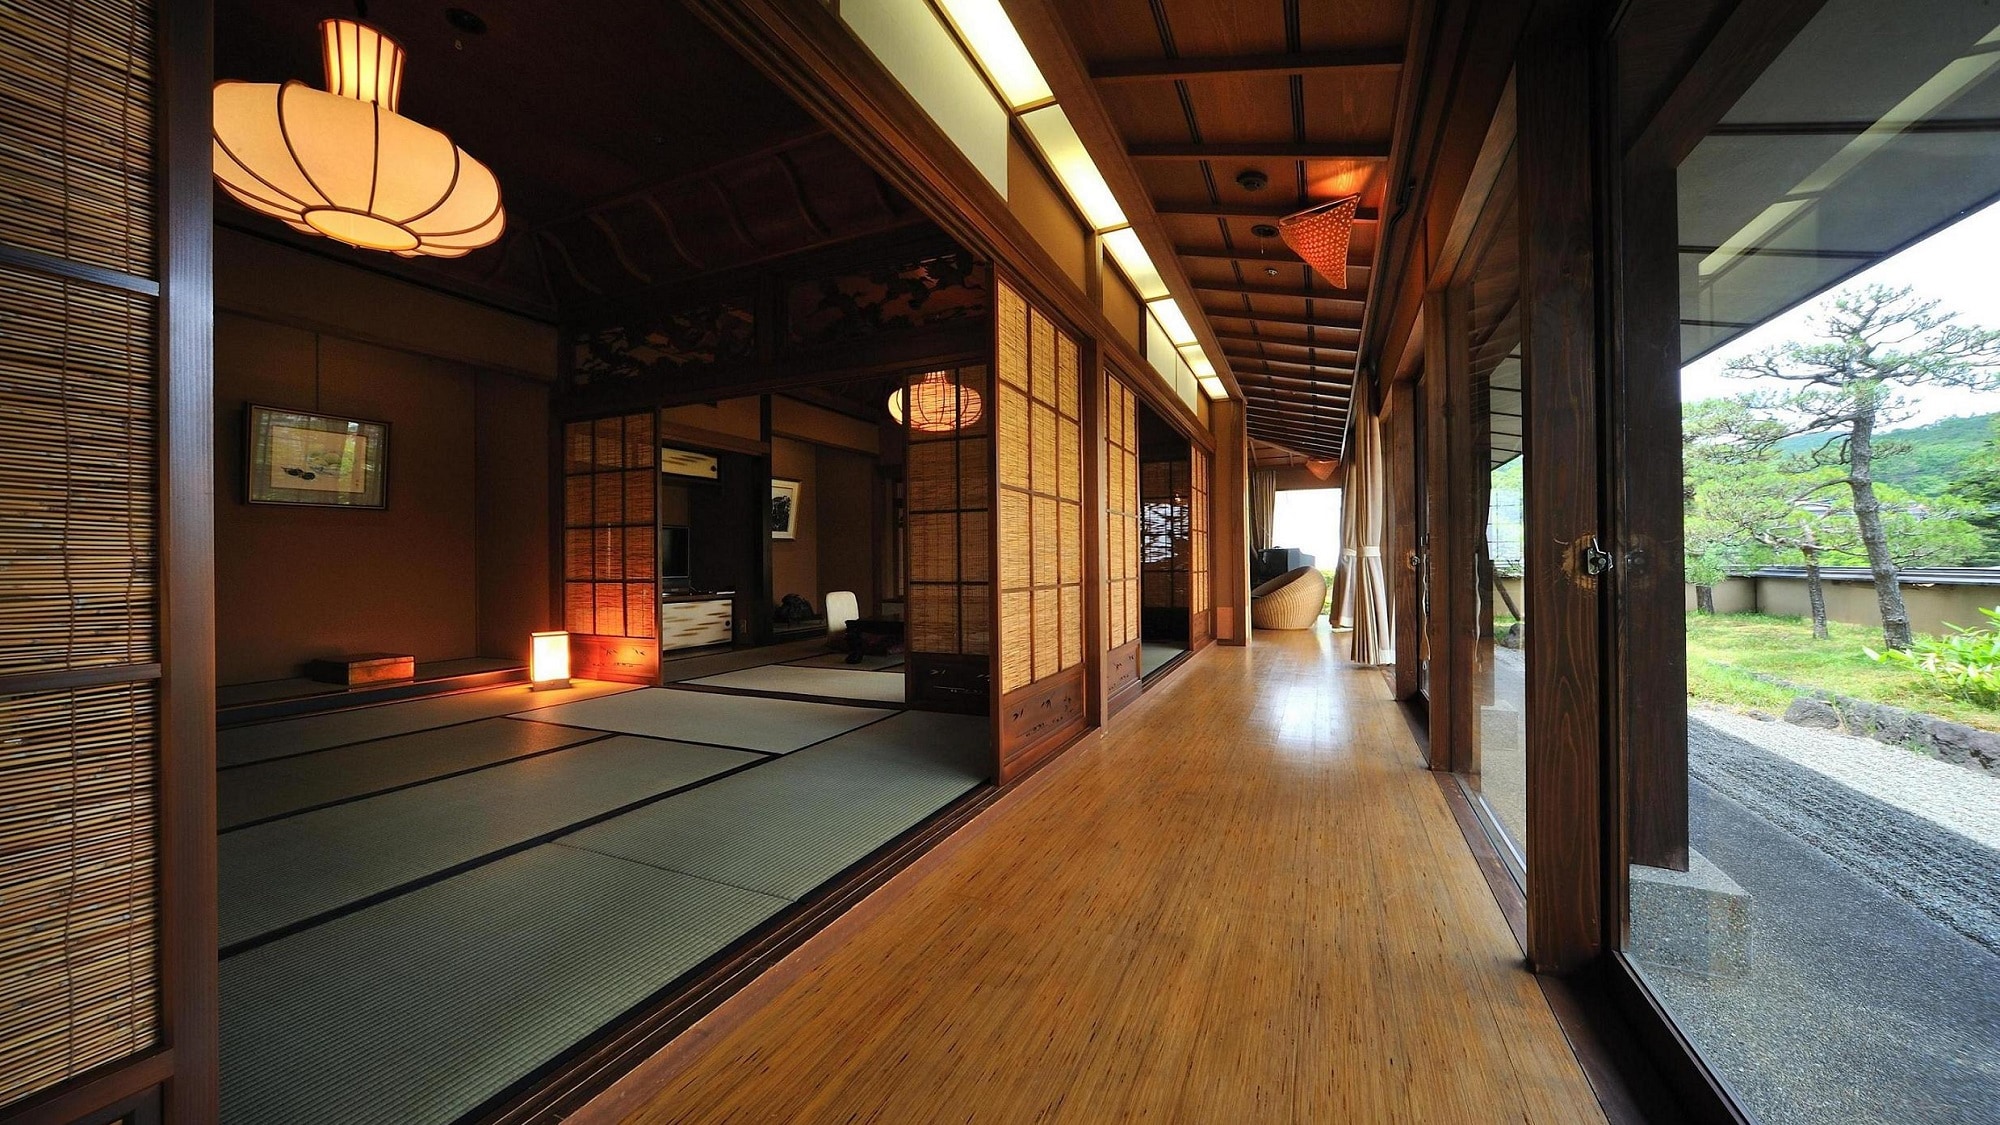 Senkeien "Hinoki" A room where you can experience the flow of the good old days